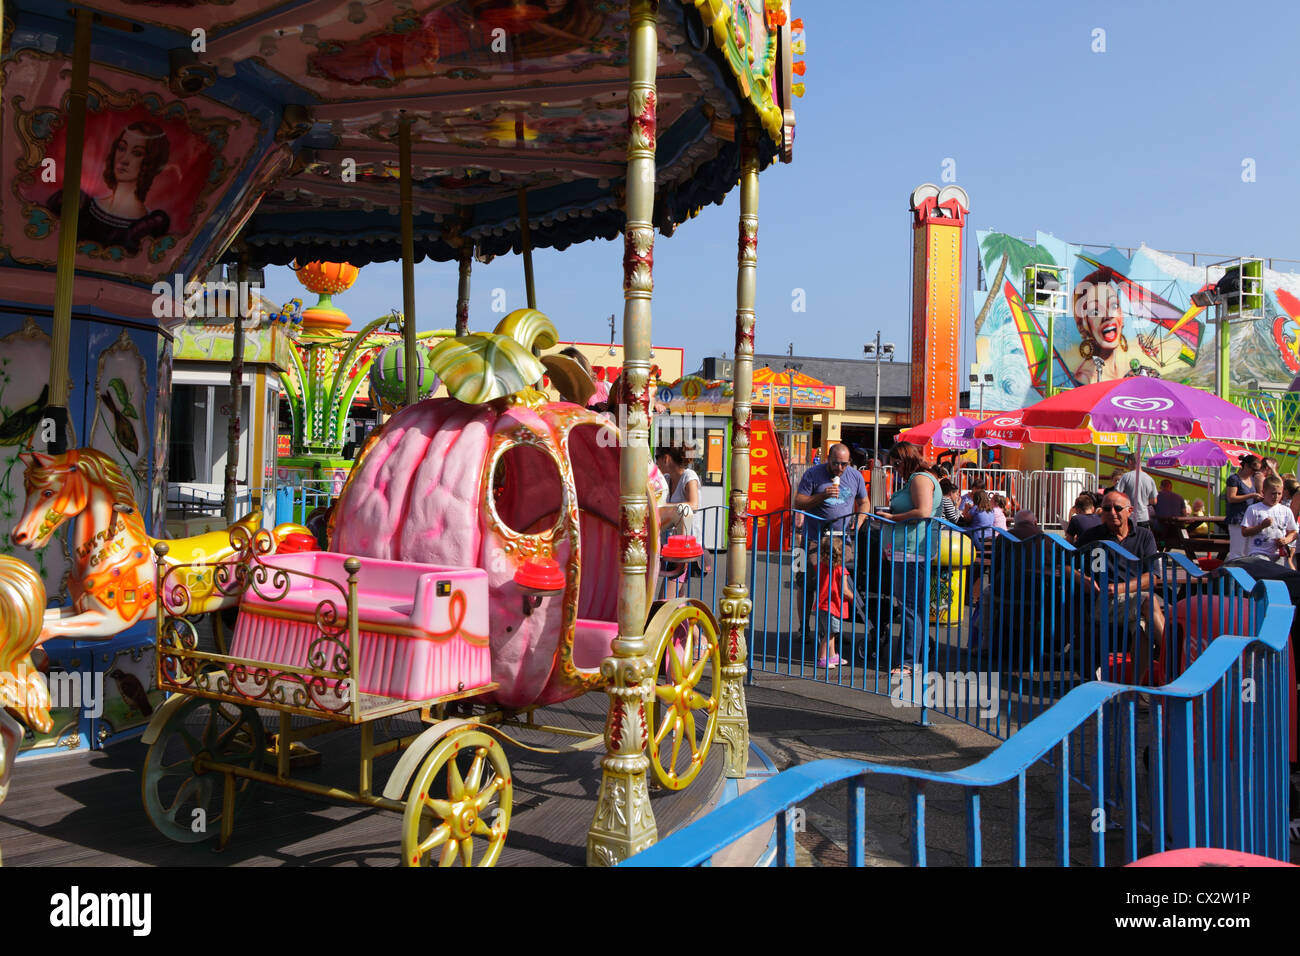 Funfair Hastings seafront East Sussex England UK GB Stock Photo